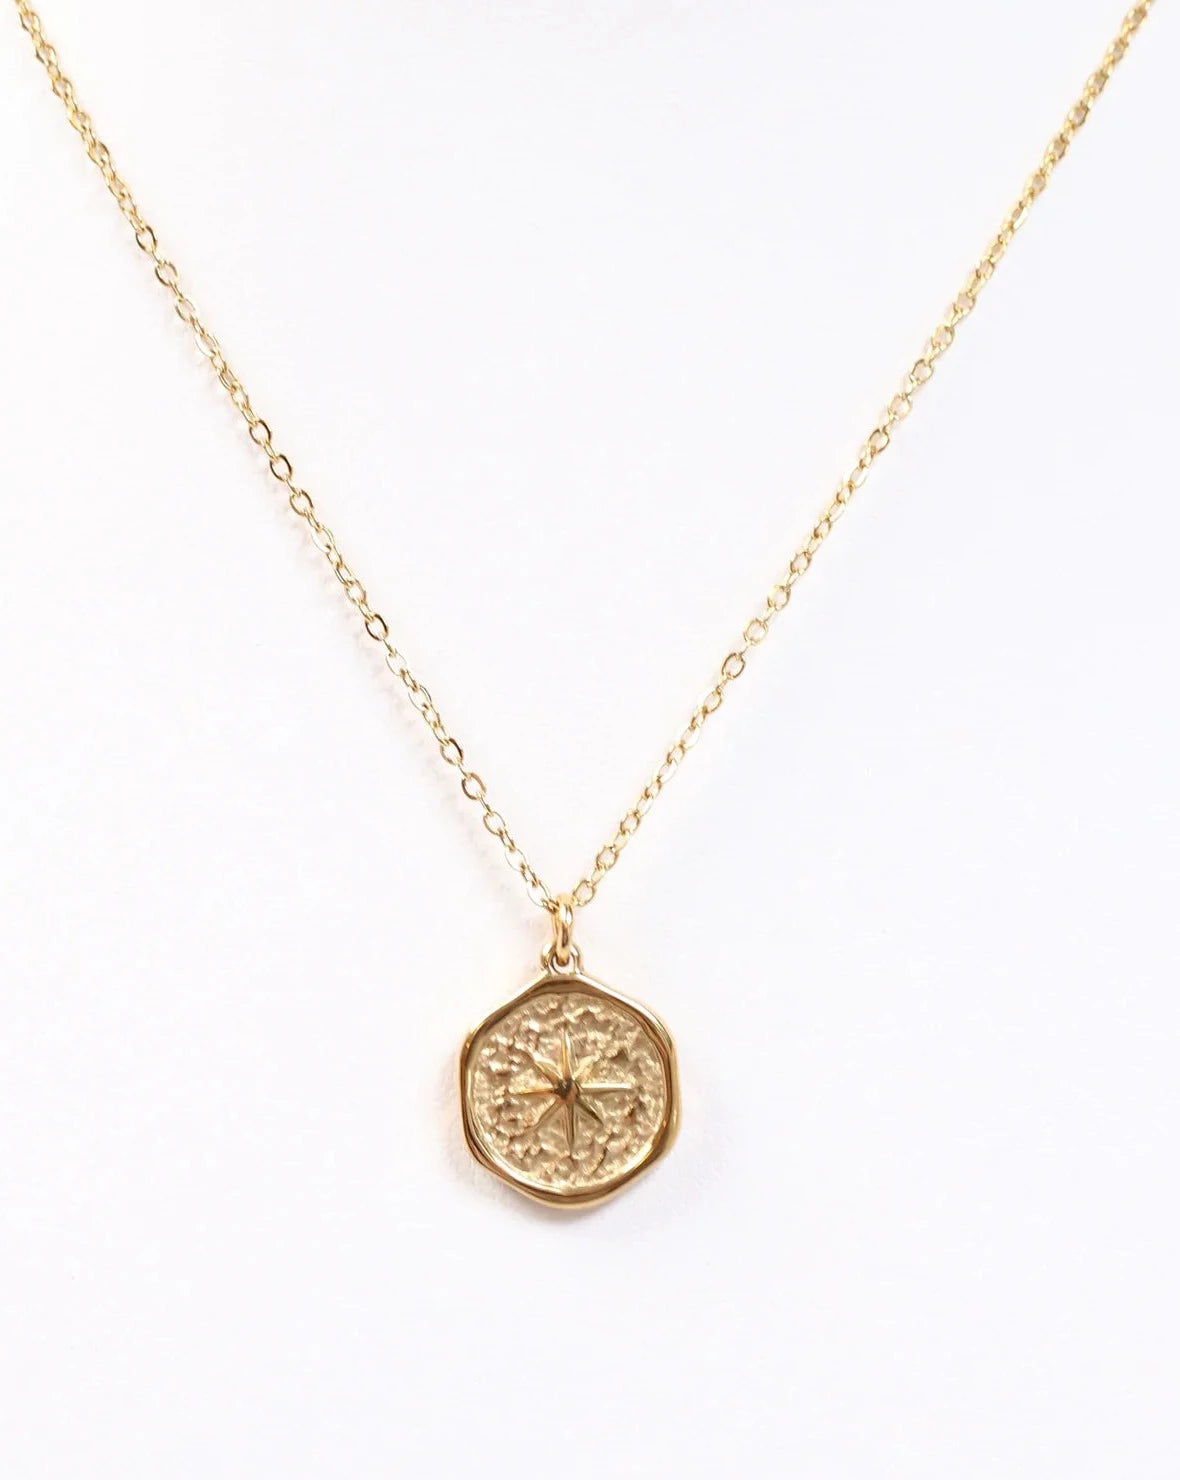 Marieville Circle Charm Necklace Gold-Necklaces-Caroline Hill-LouisGeorge Boutique, Women’s Fashion Boutique Located in Trussville, Alabama